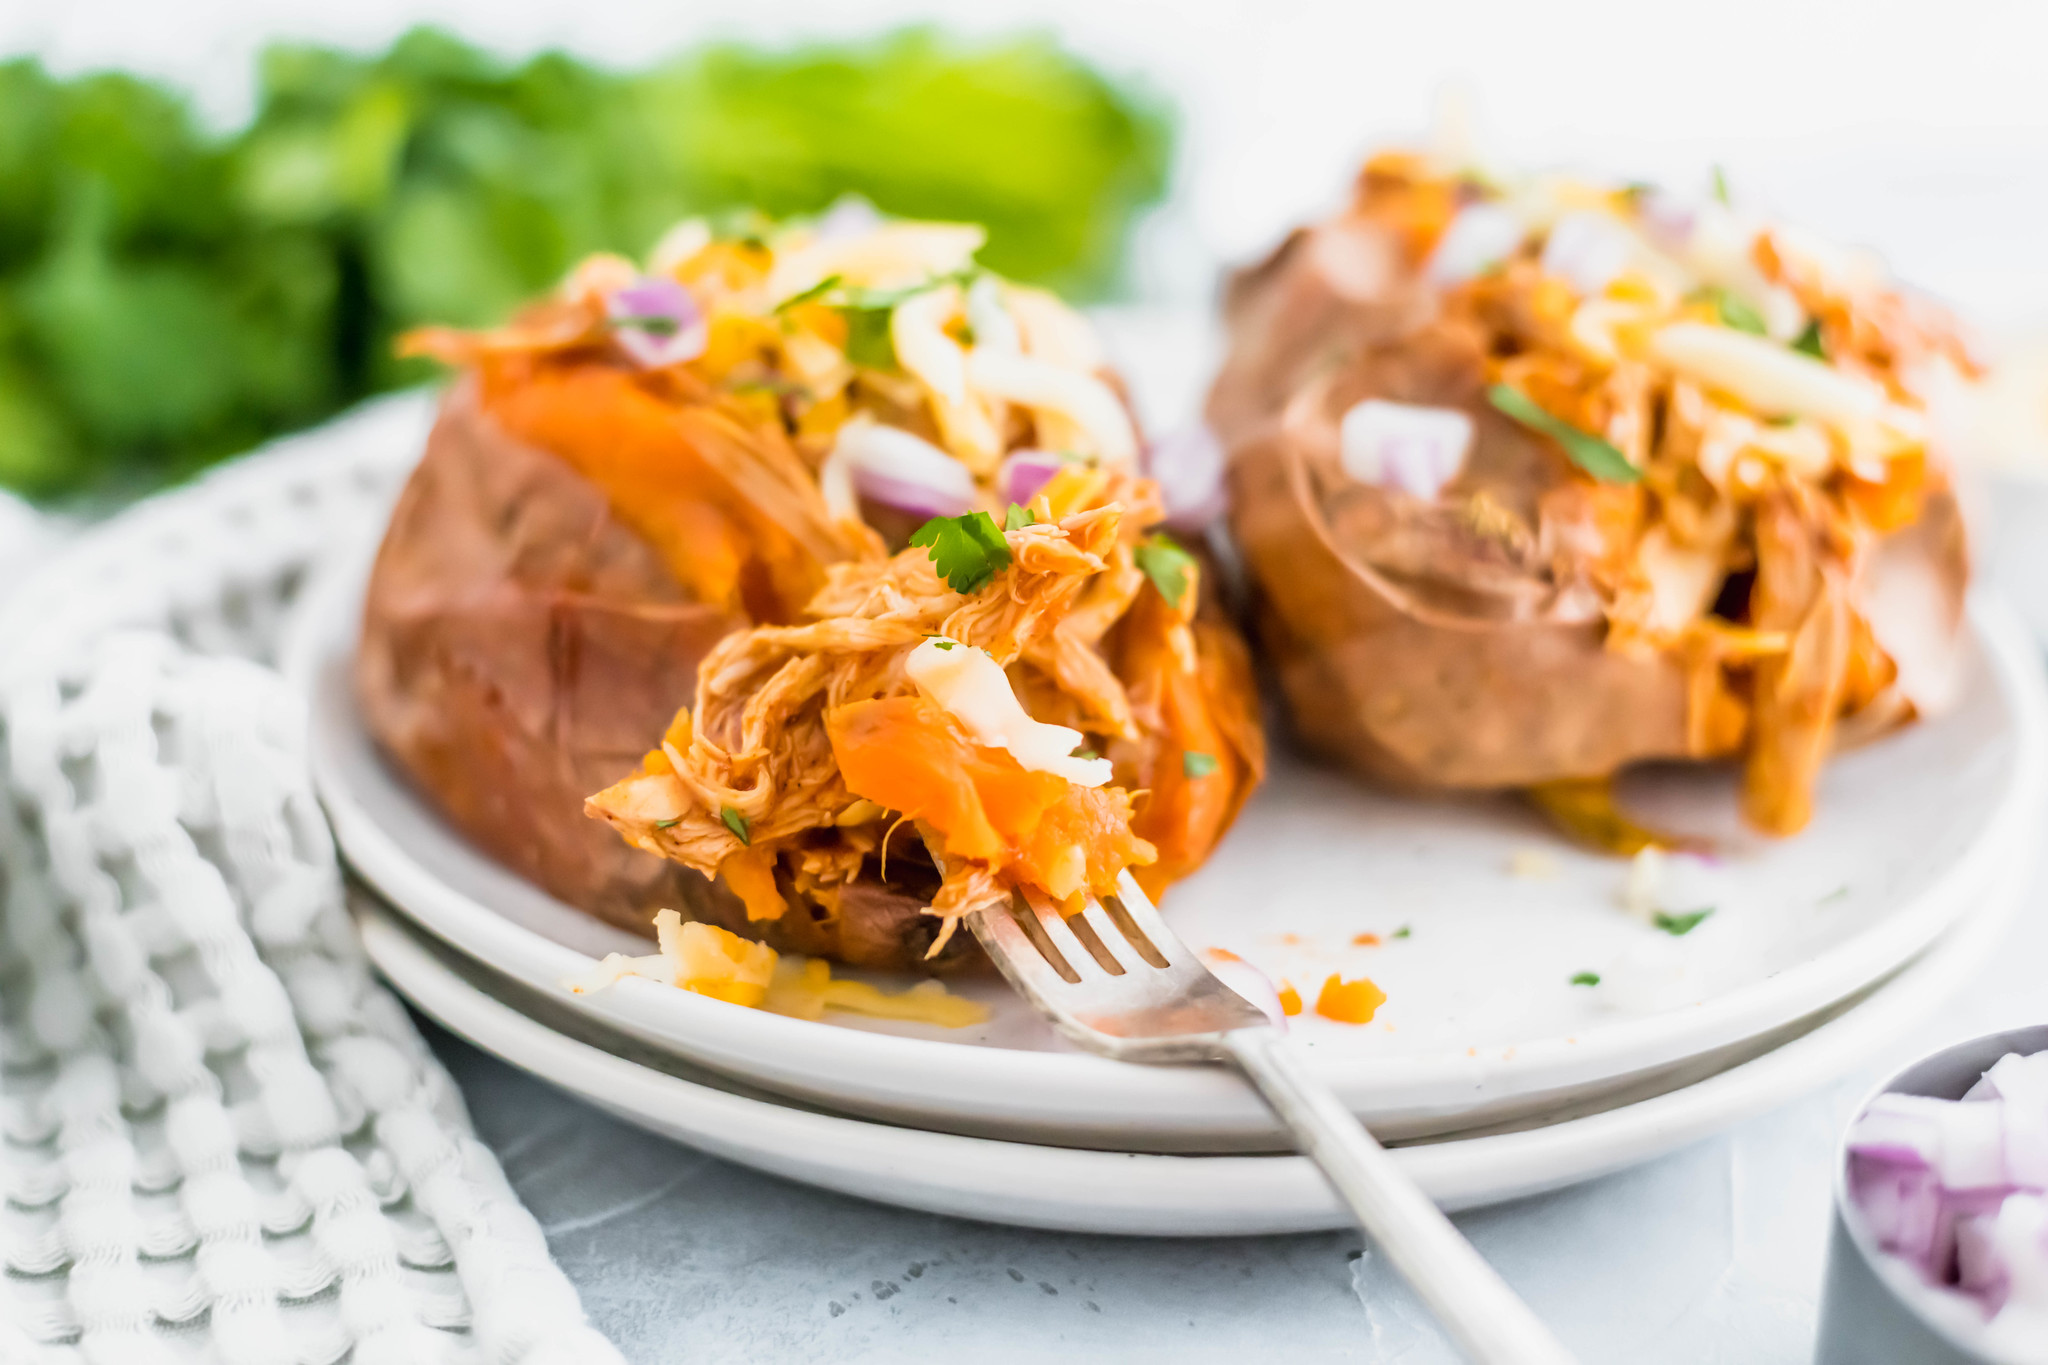 Eating healthy doesn't have to be boring. Especially with these BBQ Chicken Stuffed Sweet Potatoes around. Simple to prep and so yummy.